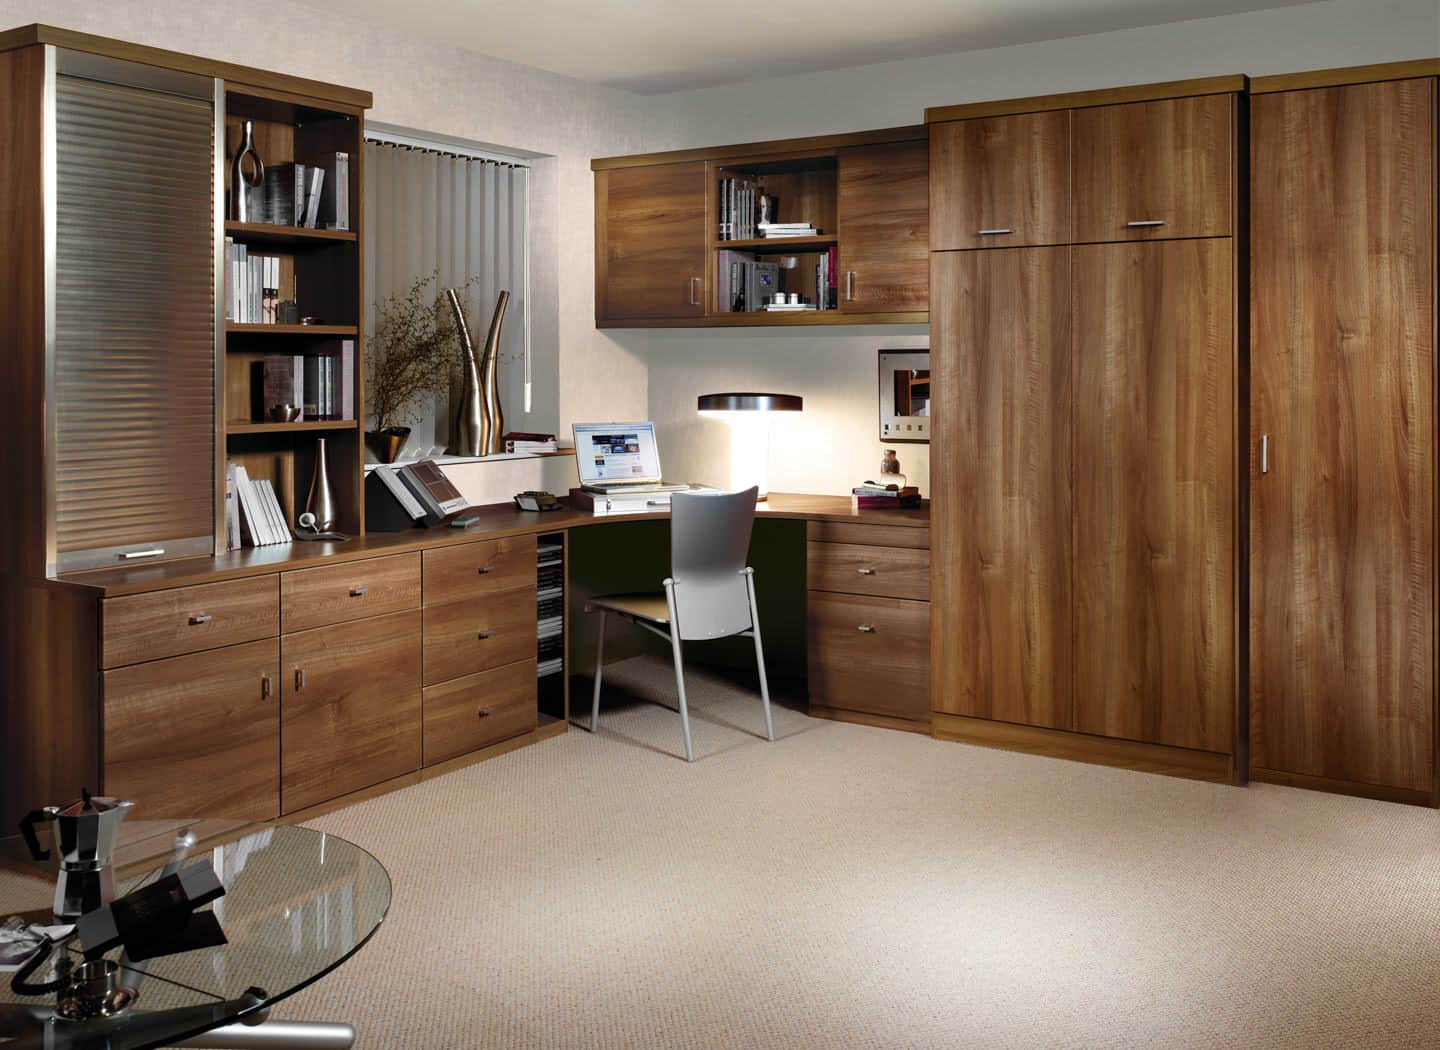 furniture for a study bedroom